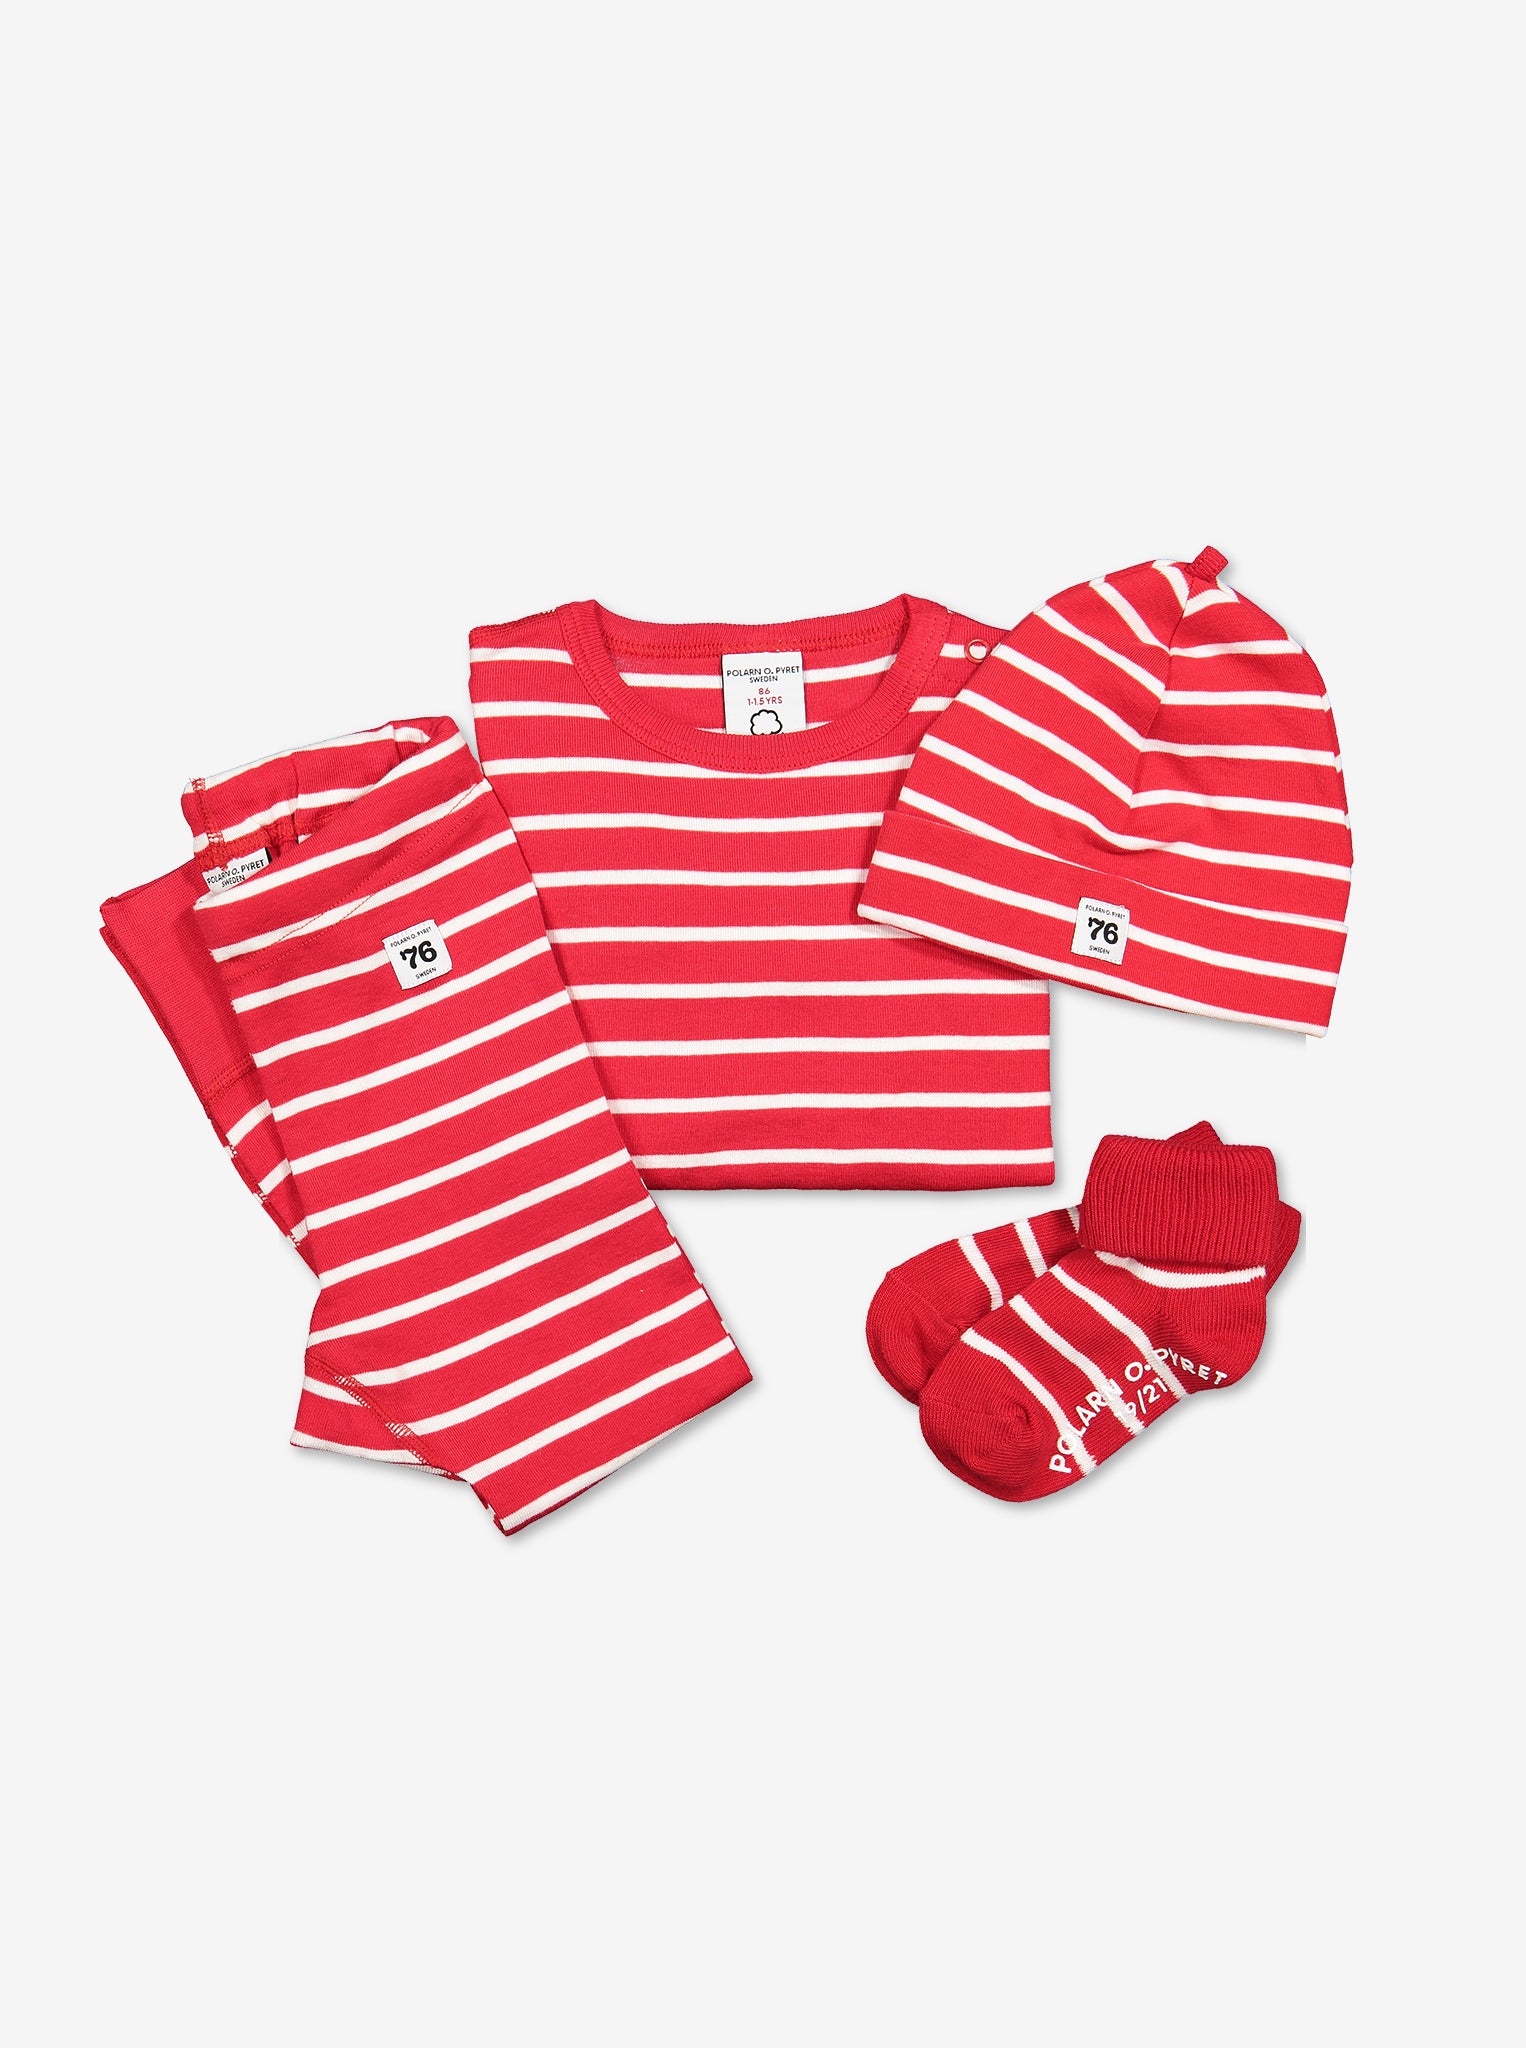 kids top leggings hat socks red and white stripes, organic cotton ethical quality, polarn o. pyret